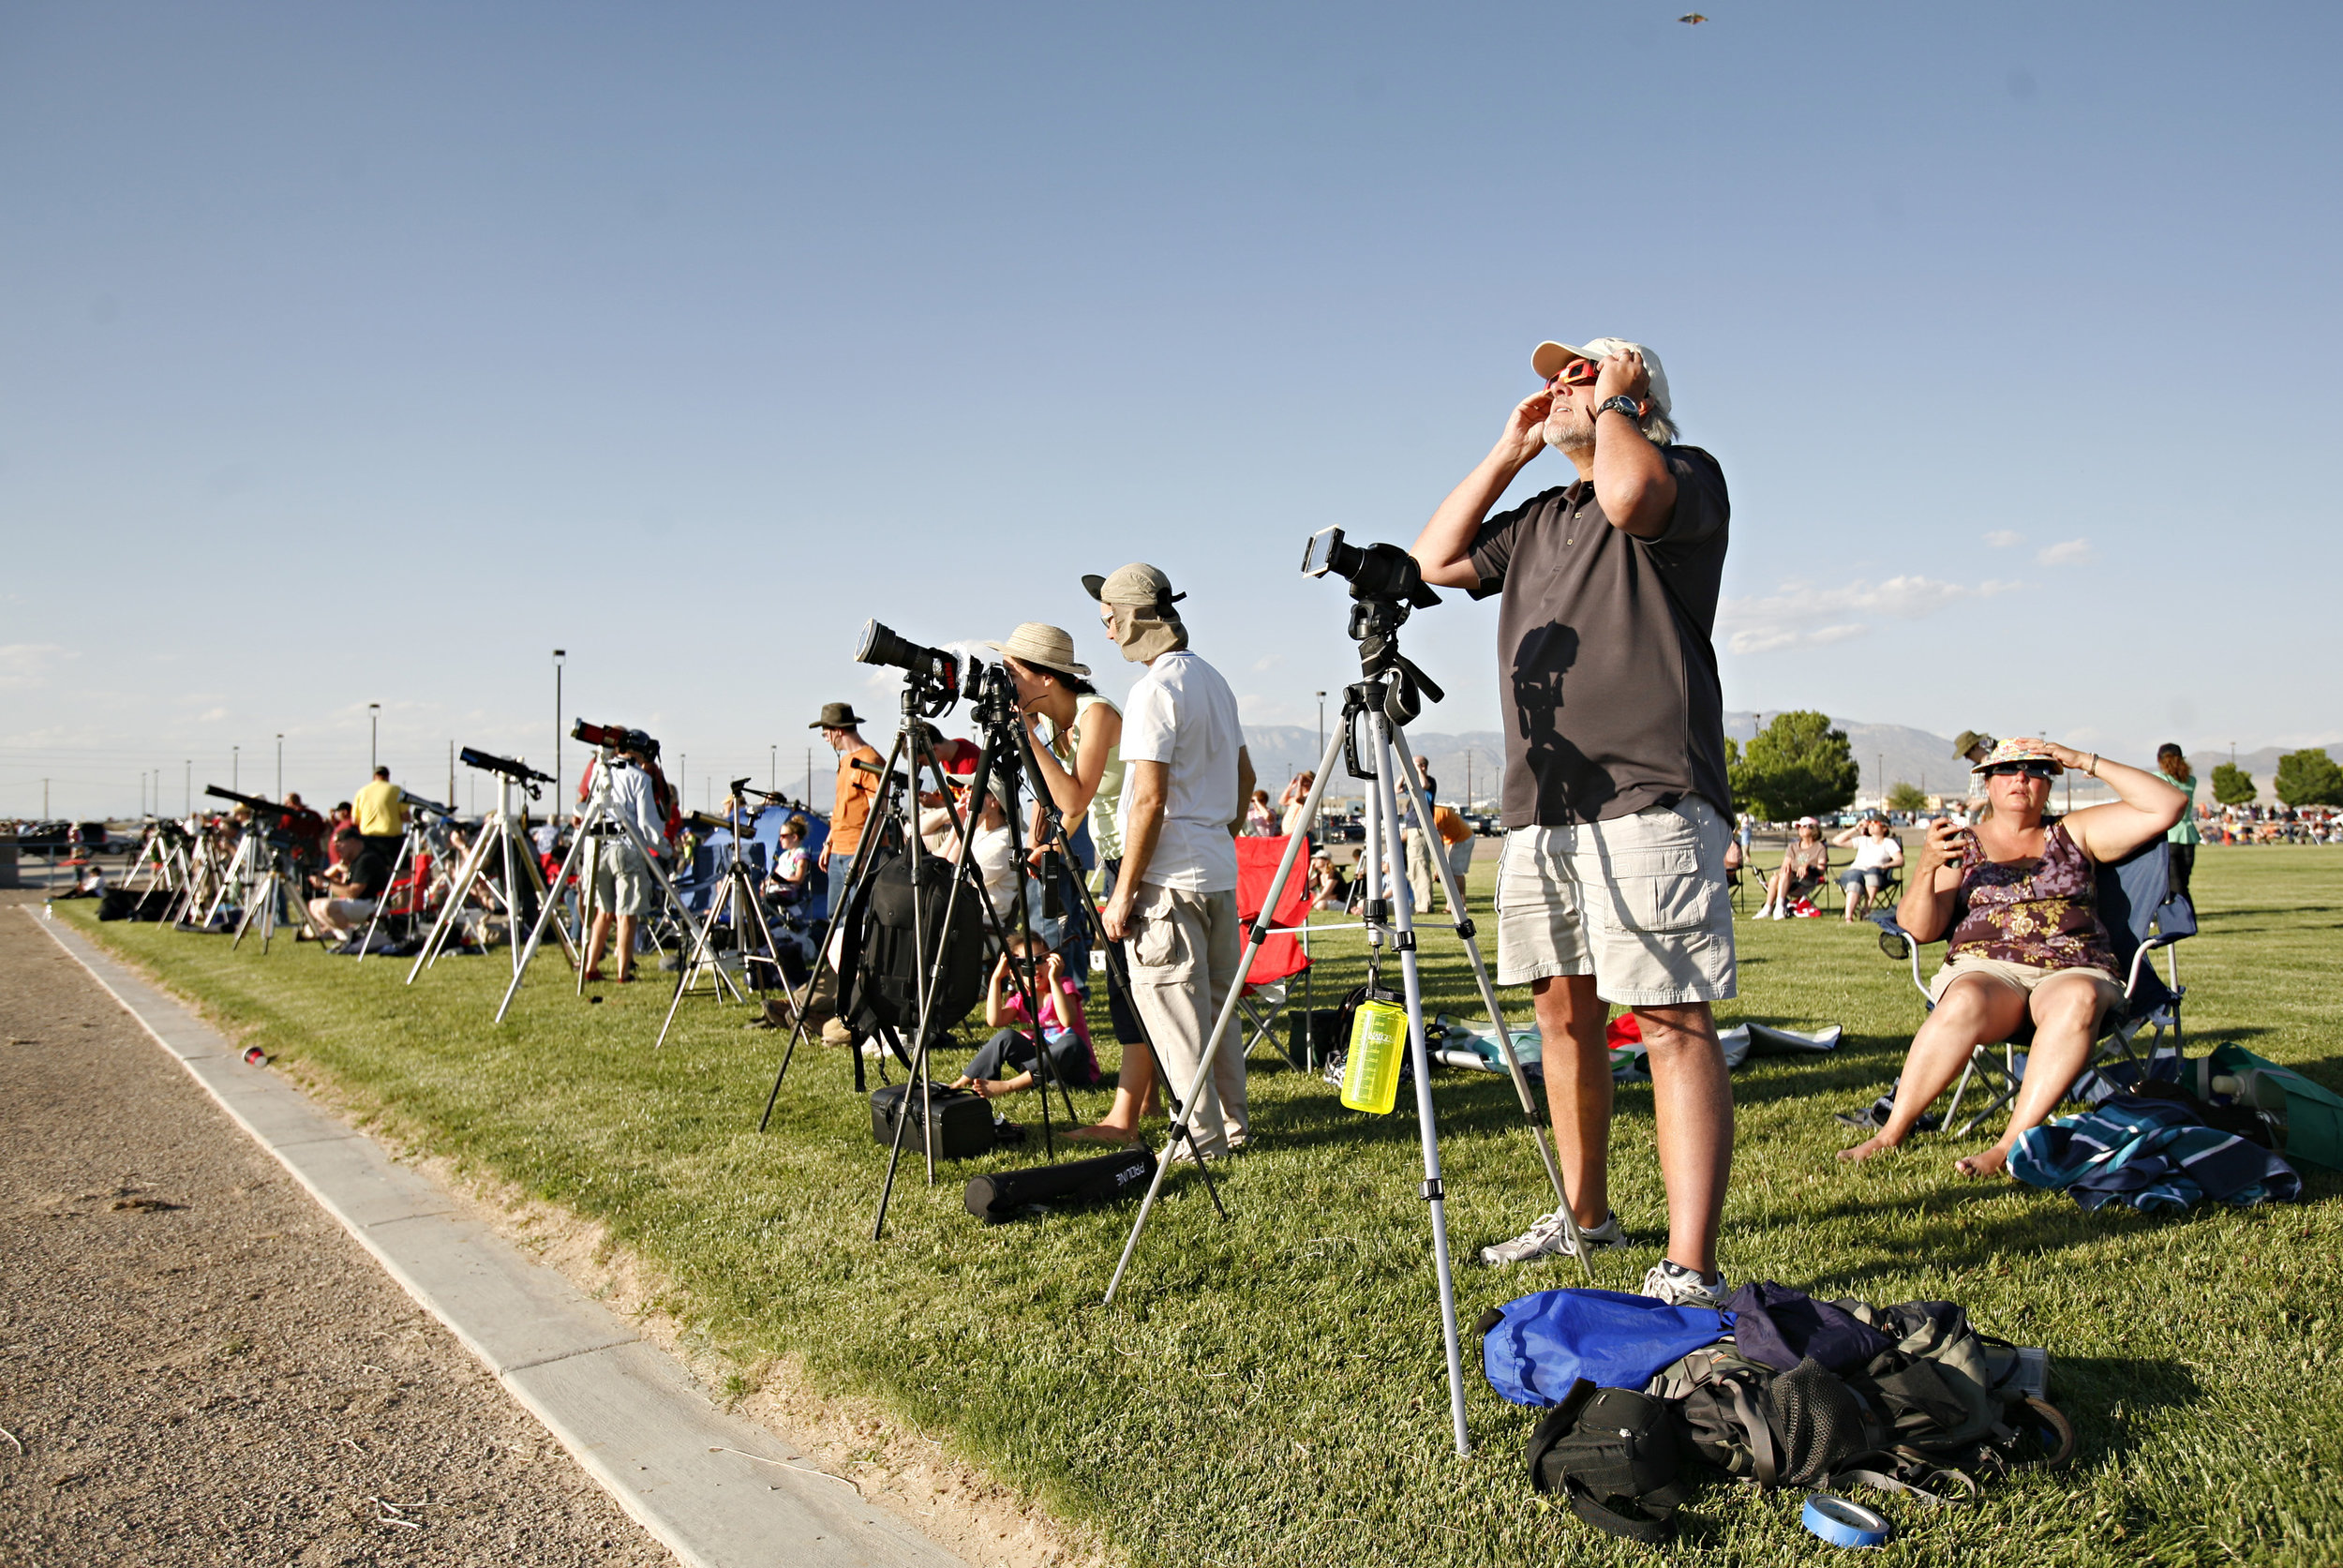  Second from the right, Cal Harr, from Centennial, CO, takes a look through his solar glasses while getting his camera set up to photograph the annular solar eclipse while taking part in the viewing party near the Hard Rock Casino Presents the Pavili